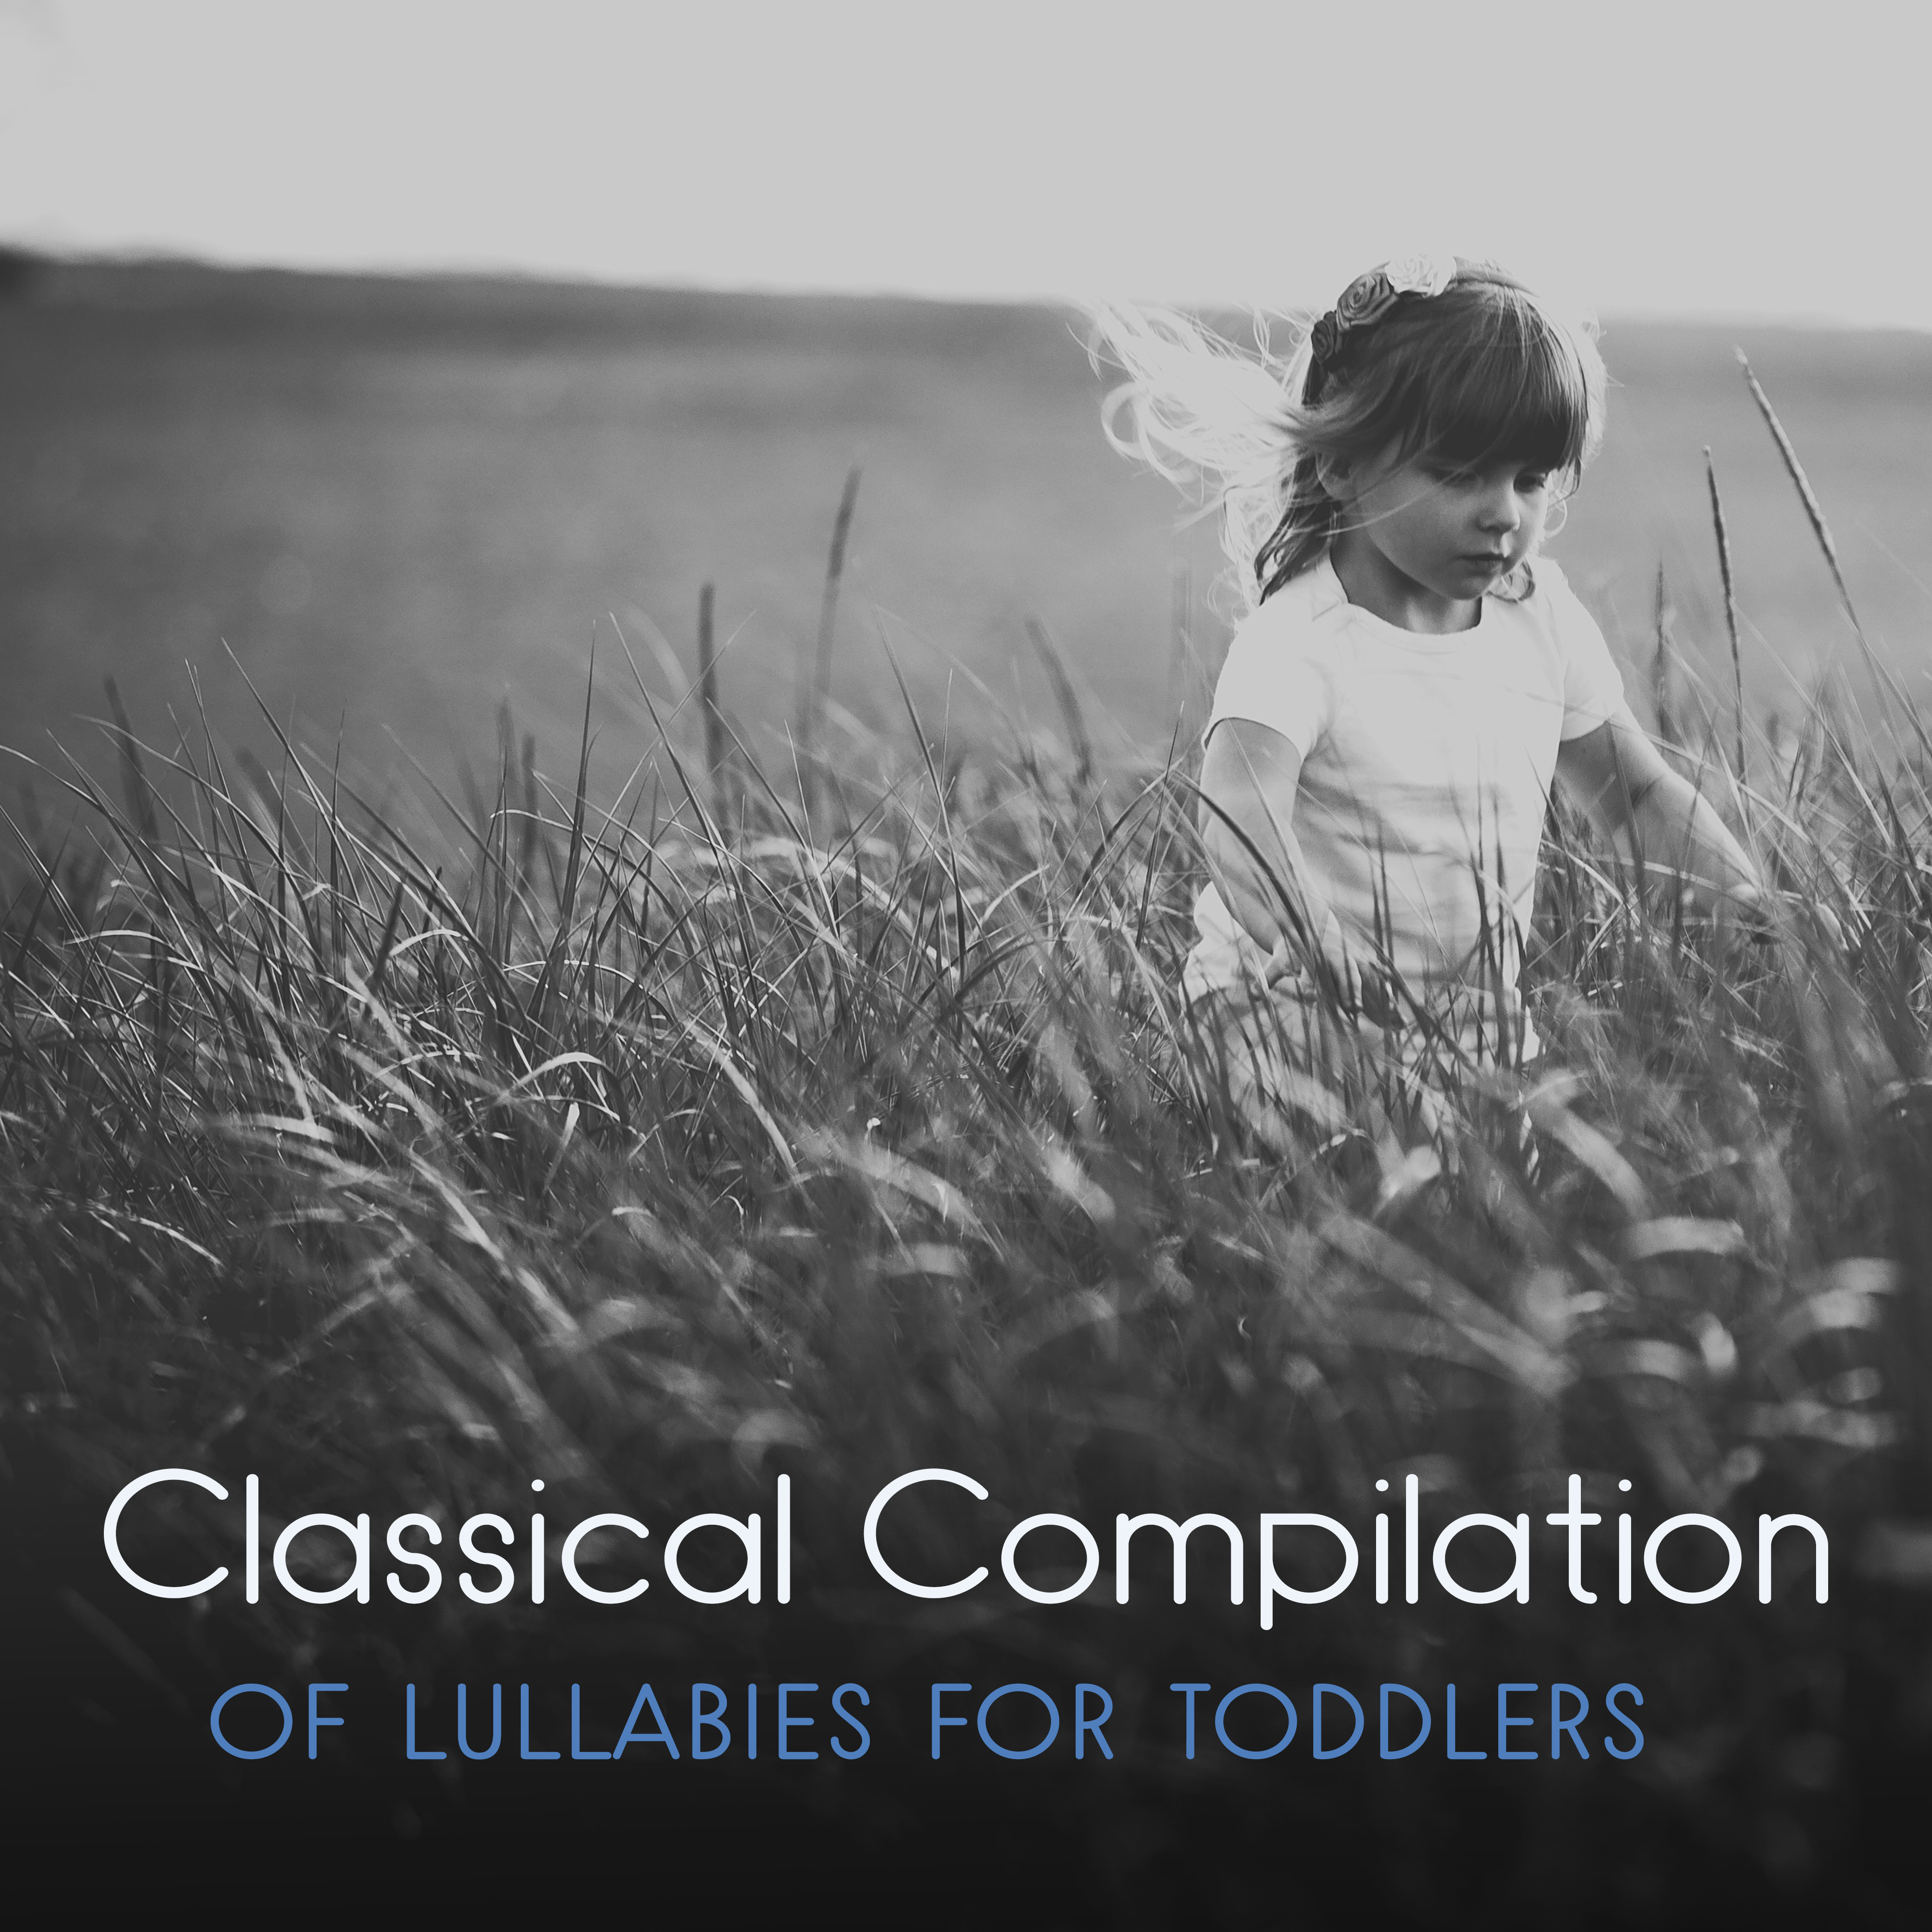 Classical Compilation of Lullabies for Toddlers